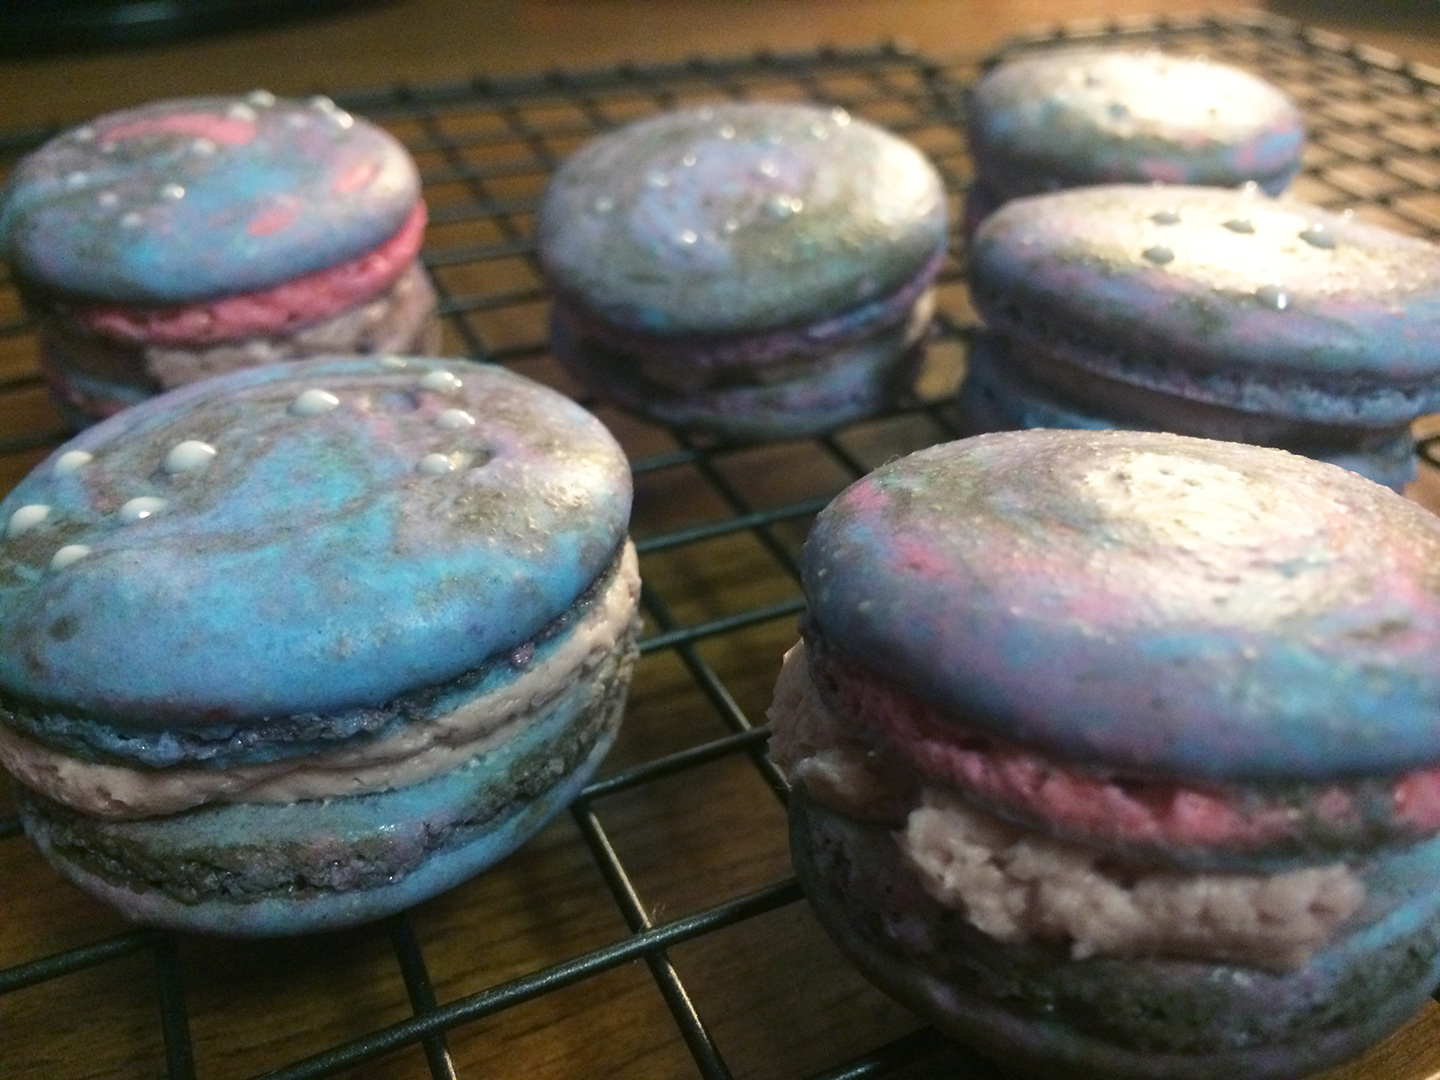 “The main complaints we have are that we don’t get to eat his cookies and cupcakes anymore,” said cross country head coach Jamey Harris of Carmichael’s avid baking. This photo features Constellation French macarons he made to replicate constellations (left to right, top to bottom): Pisces, Virgo, Leo, Scorpius, nothing but space, Orion, and Ursa Major. When asked about how he practices self control when he bakes so often, he said he mostly bakes for others and “basically just tries one cookie to sees how they taste, the rest are to share.” Photo courtesy of Theron Carmichael